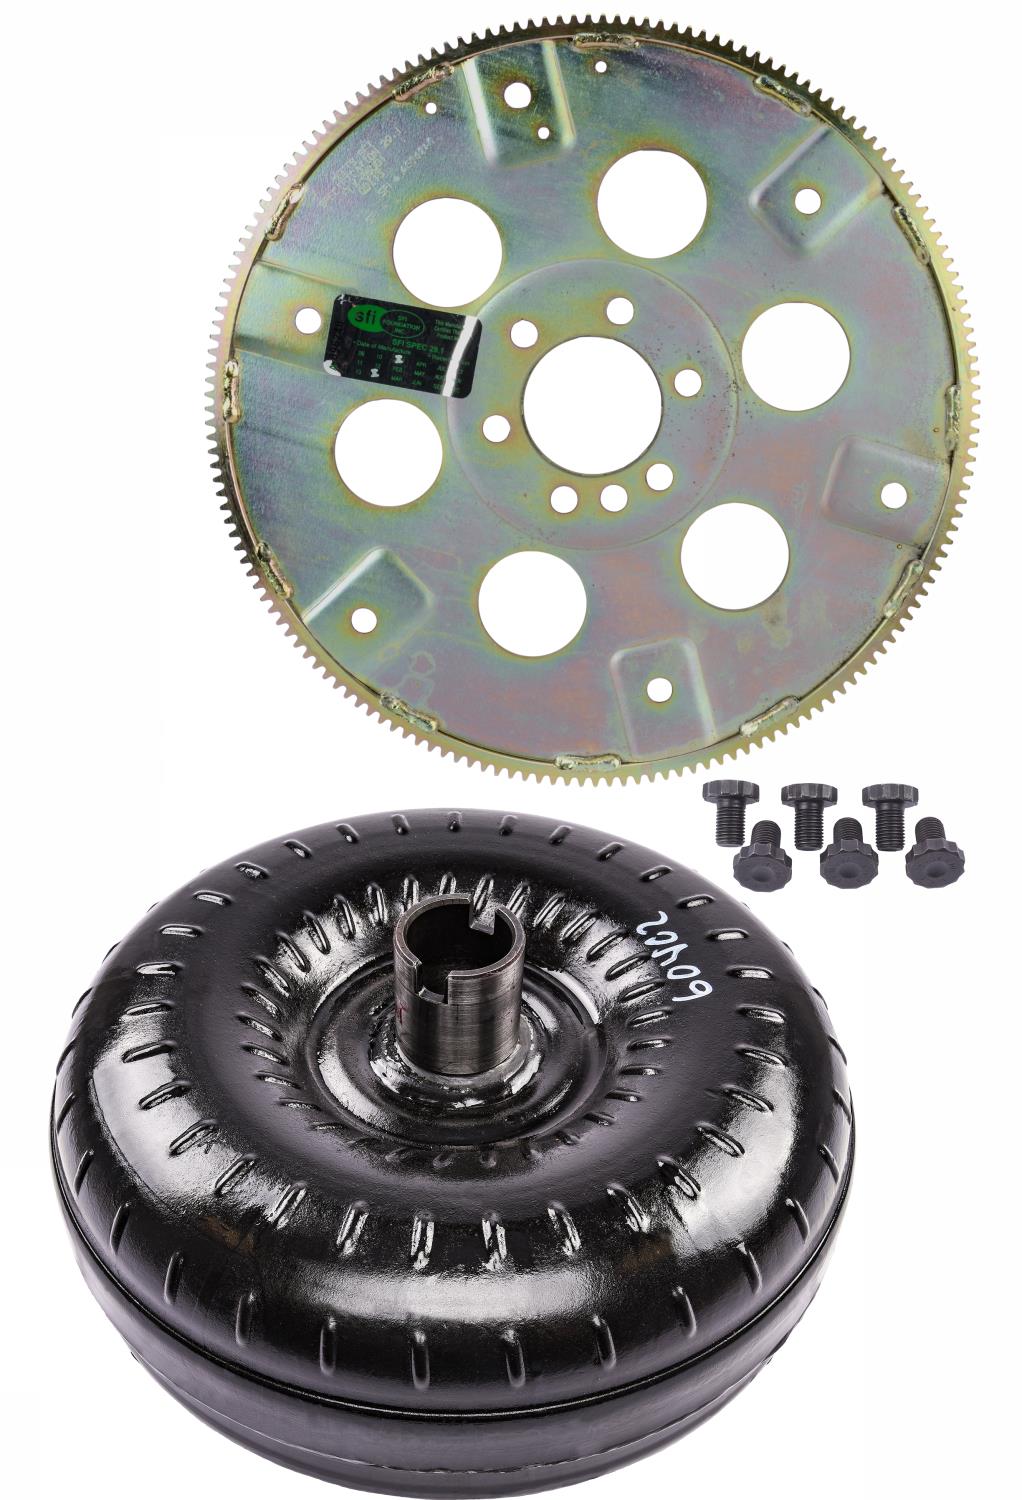 Torque Converter Kit for GM TH350/TH400 [2000-2300 RPM